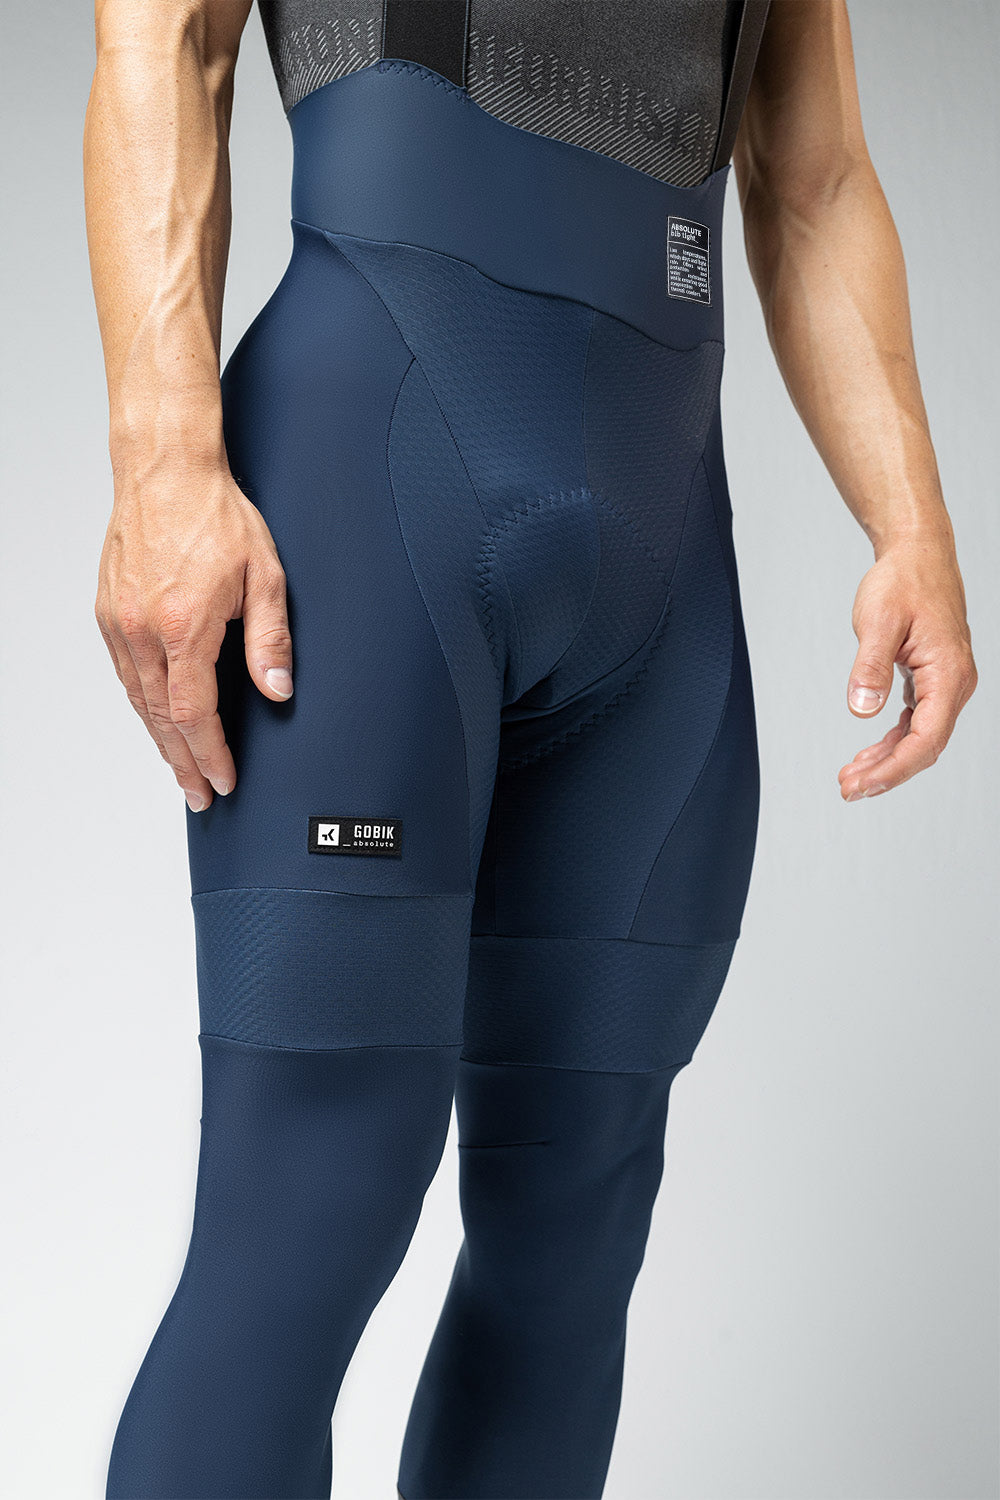 COLLANT ABSOLUTE 6.0 HOMME NEPTUNE - K10